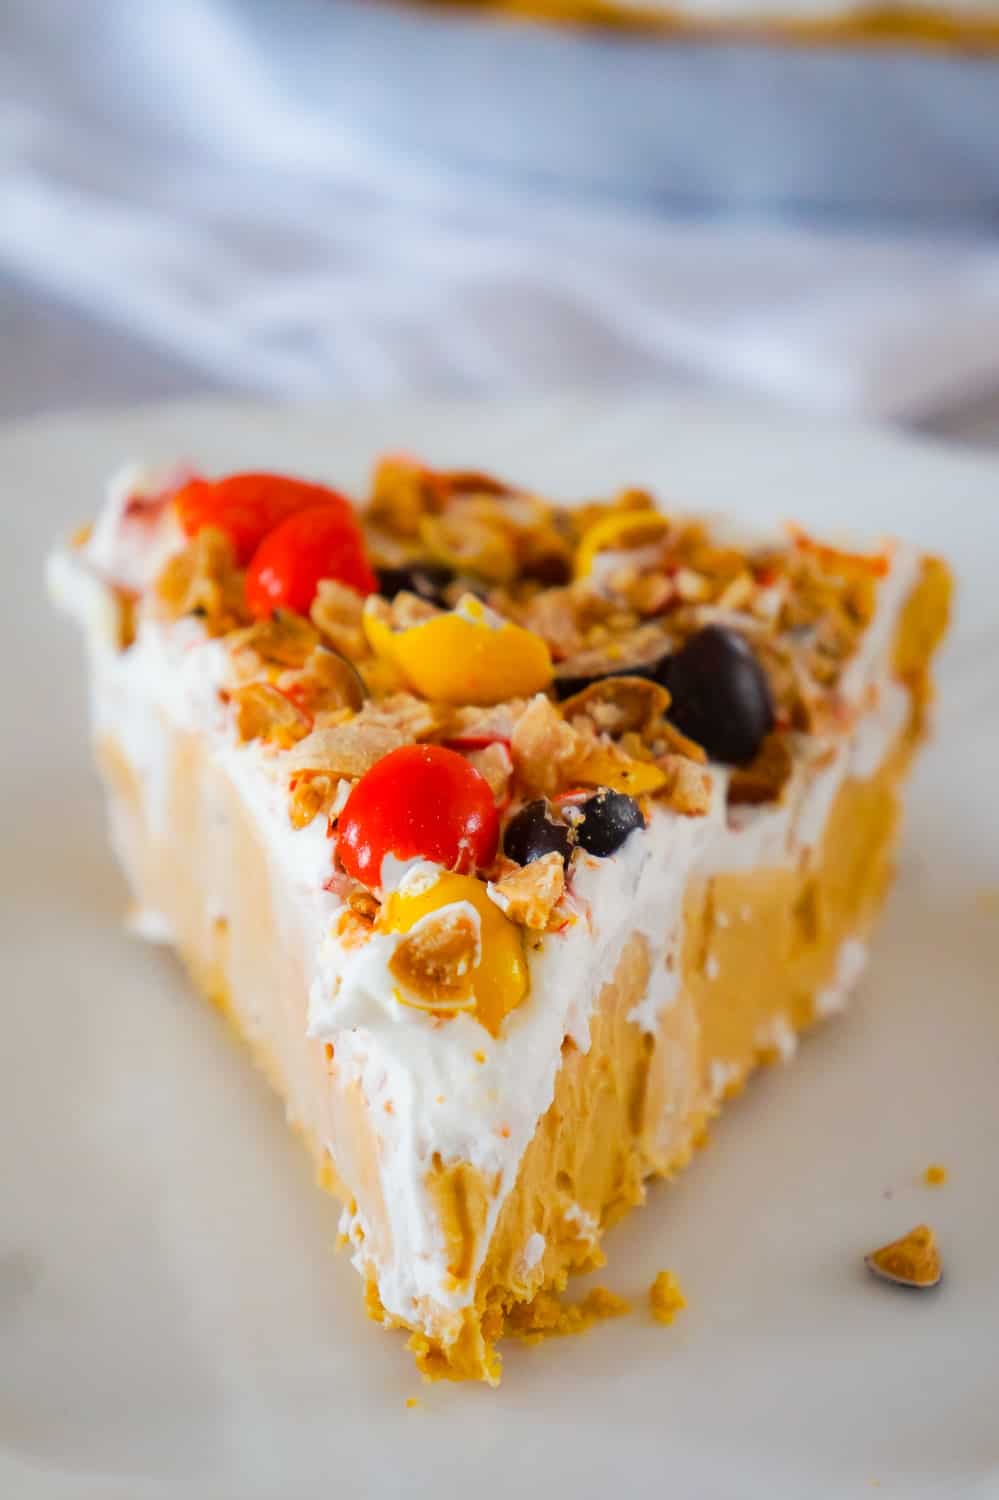 Peanut Butter Pie is an easy no bake dessert for peanut butter lovers. This no bake pie has a rich and creamy peanut butter filling, in a store bought graham crust and is topped with Cool Whip and Reese's Pieces Peanut candies.